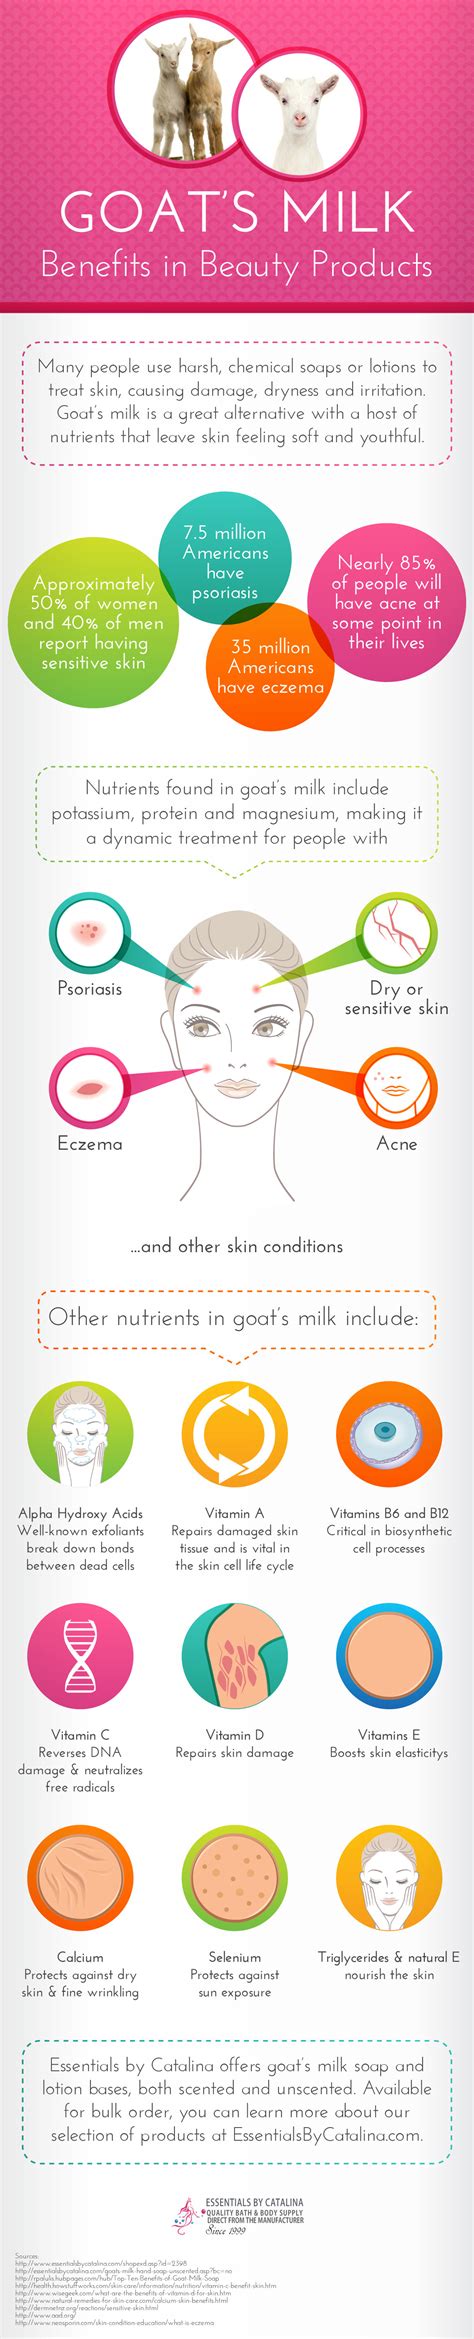 Goat milk is thicker and creamier than cow milk or plant milks, and goat milk has more nutrients that may offer health benefits. Goat's Milk Benefits in Beauty Products #infographic ...